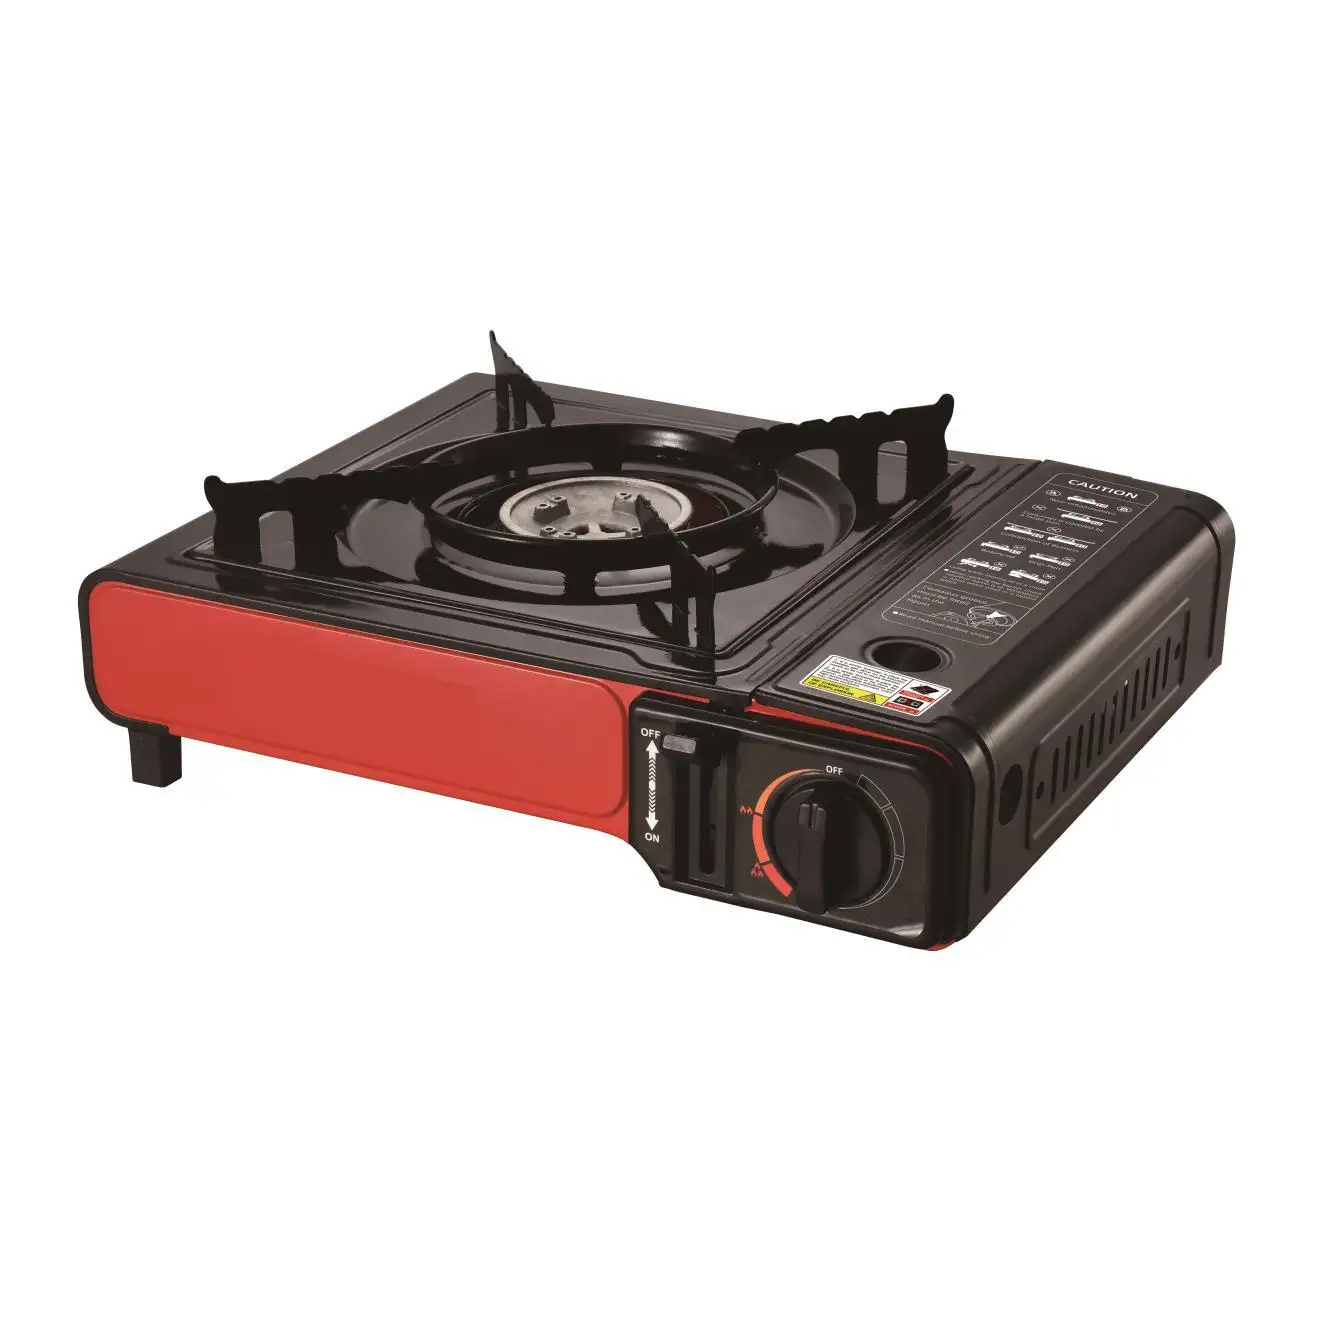 Camping For Family Cooker Stove Picnic Gas Powered Portable Card Type Heating